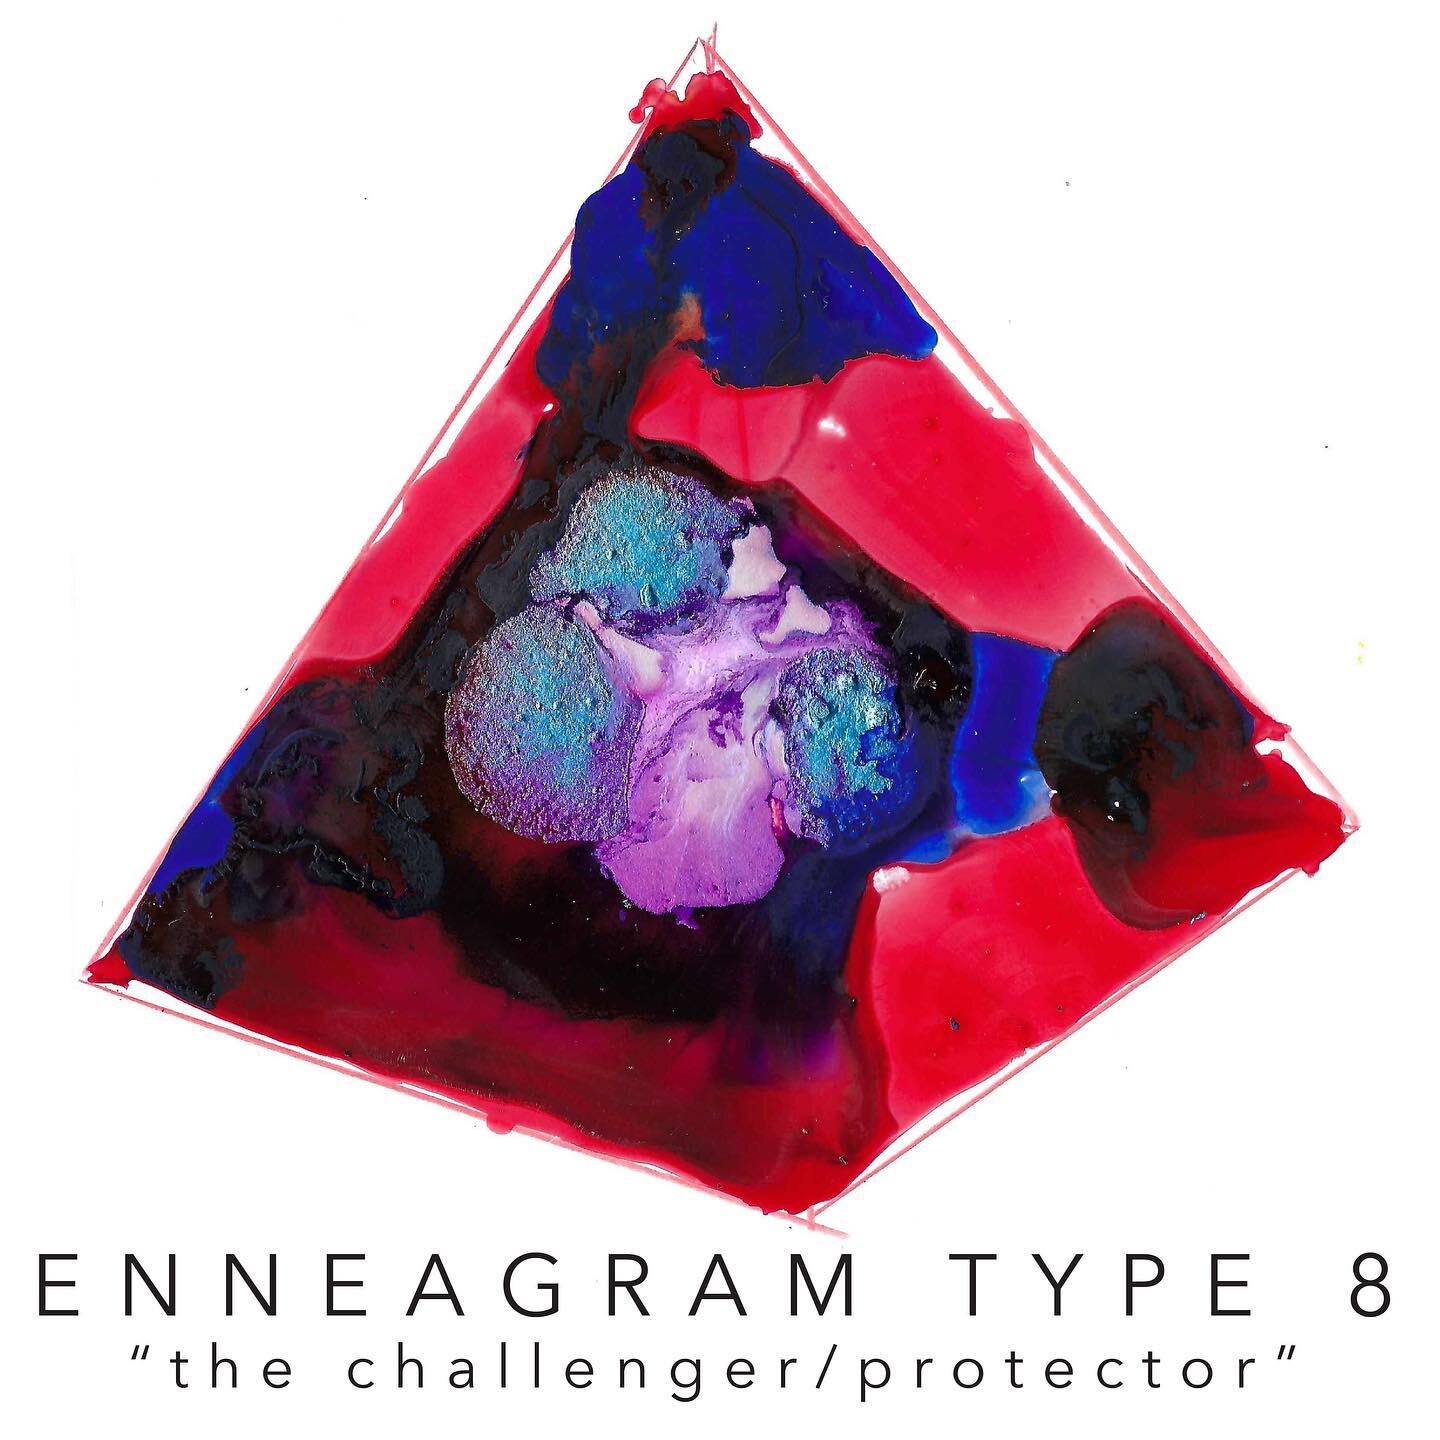 Enneagram Type 8: the voted upon winner to represent Enneagram type 8! However, the runner-up seemed to be how 8s saw themselves vs the winner being how the world sees type 8s. &mdash;
.
.
.
the data I gathered, arrows / squares/ arches and triangles